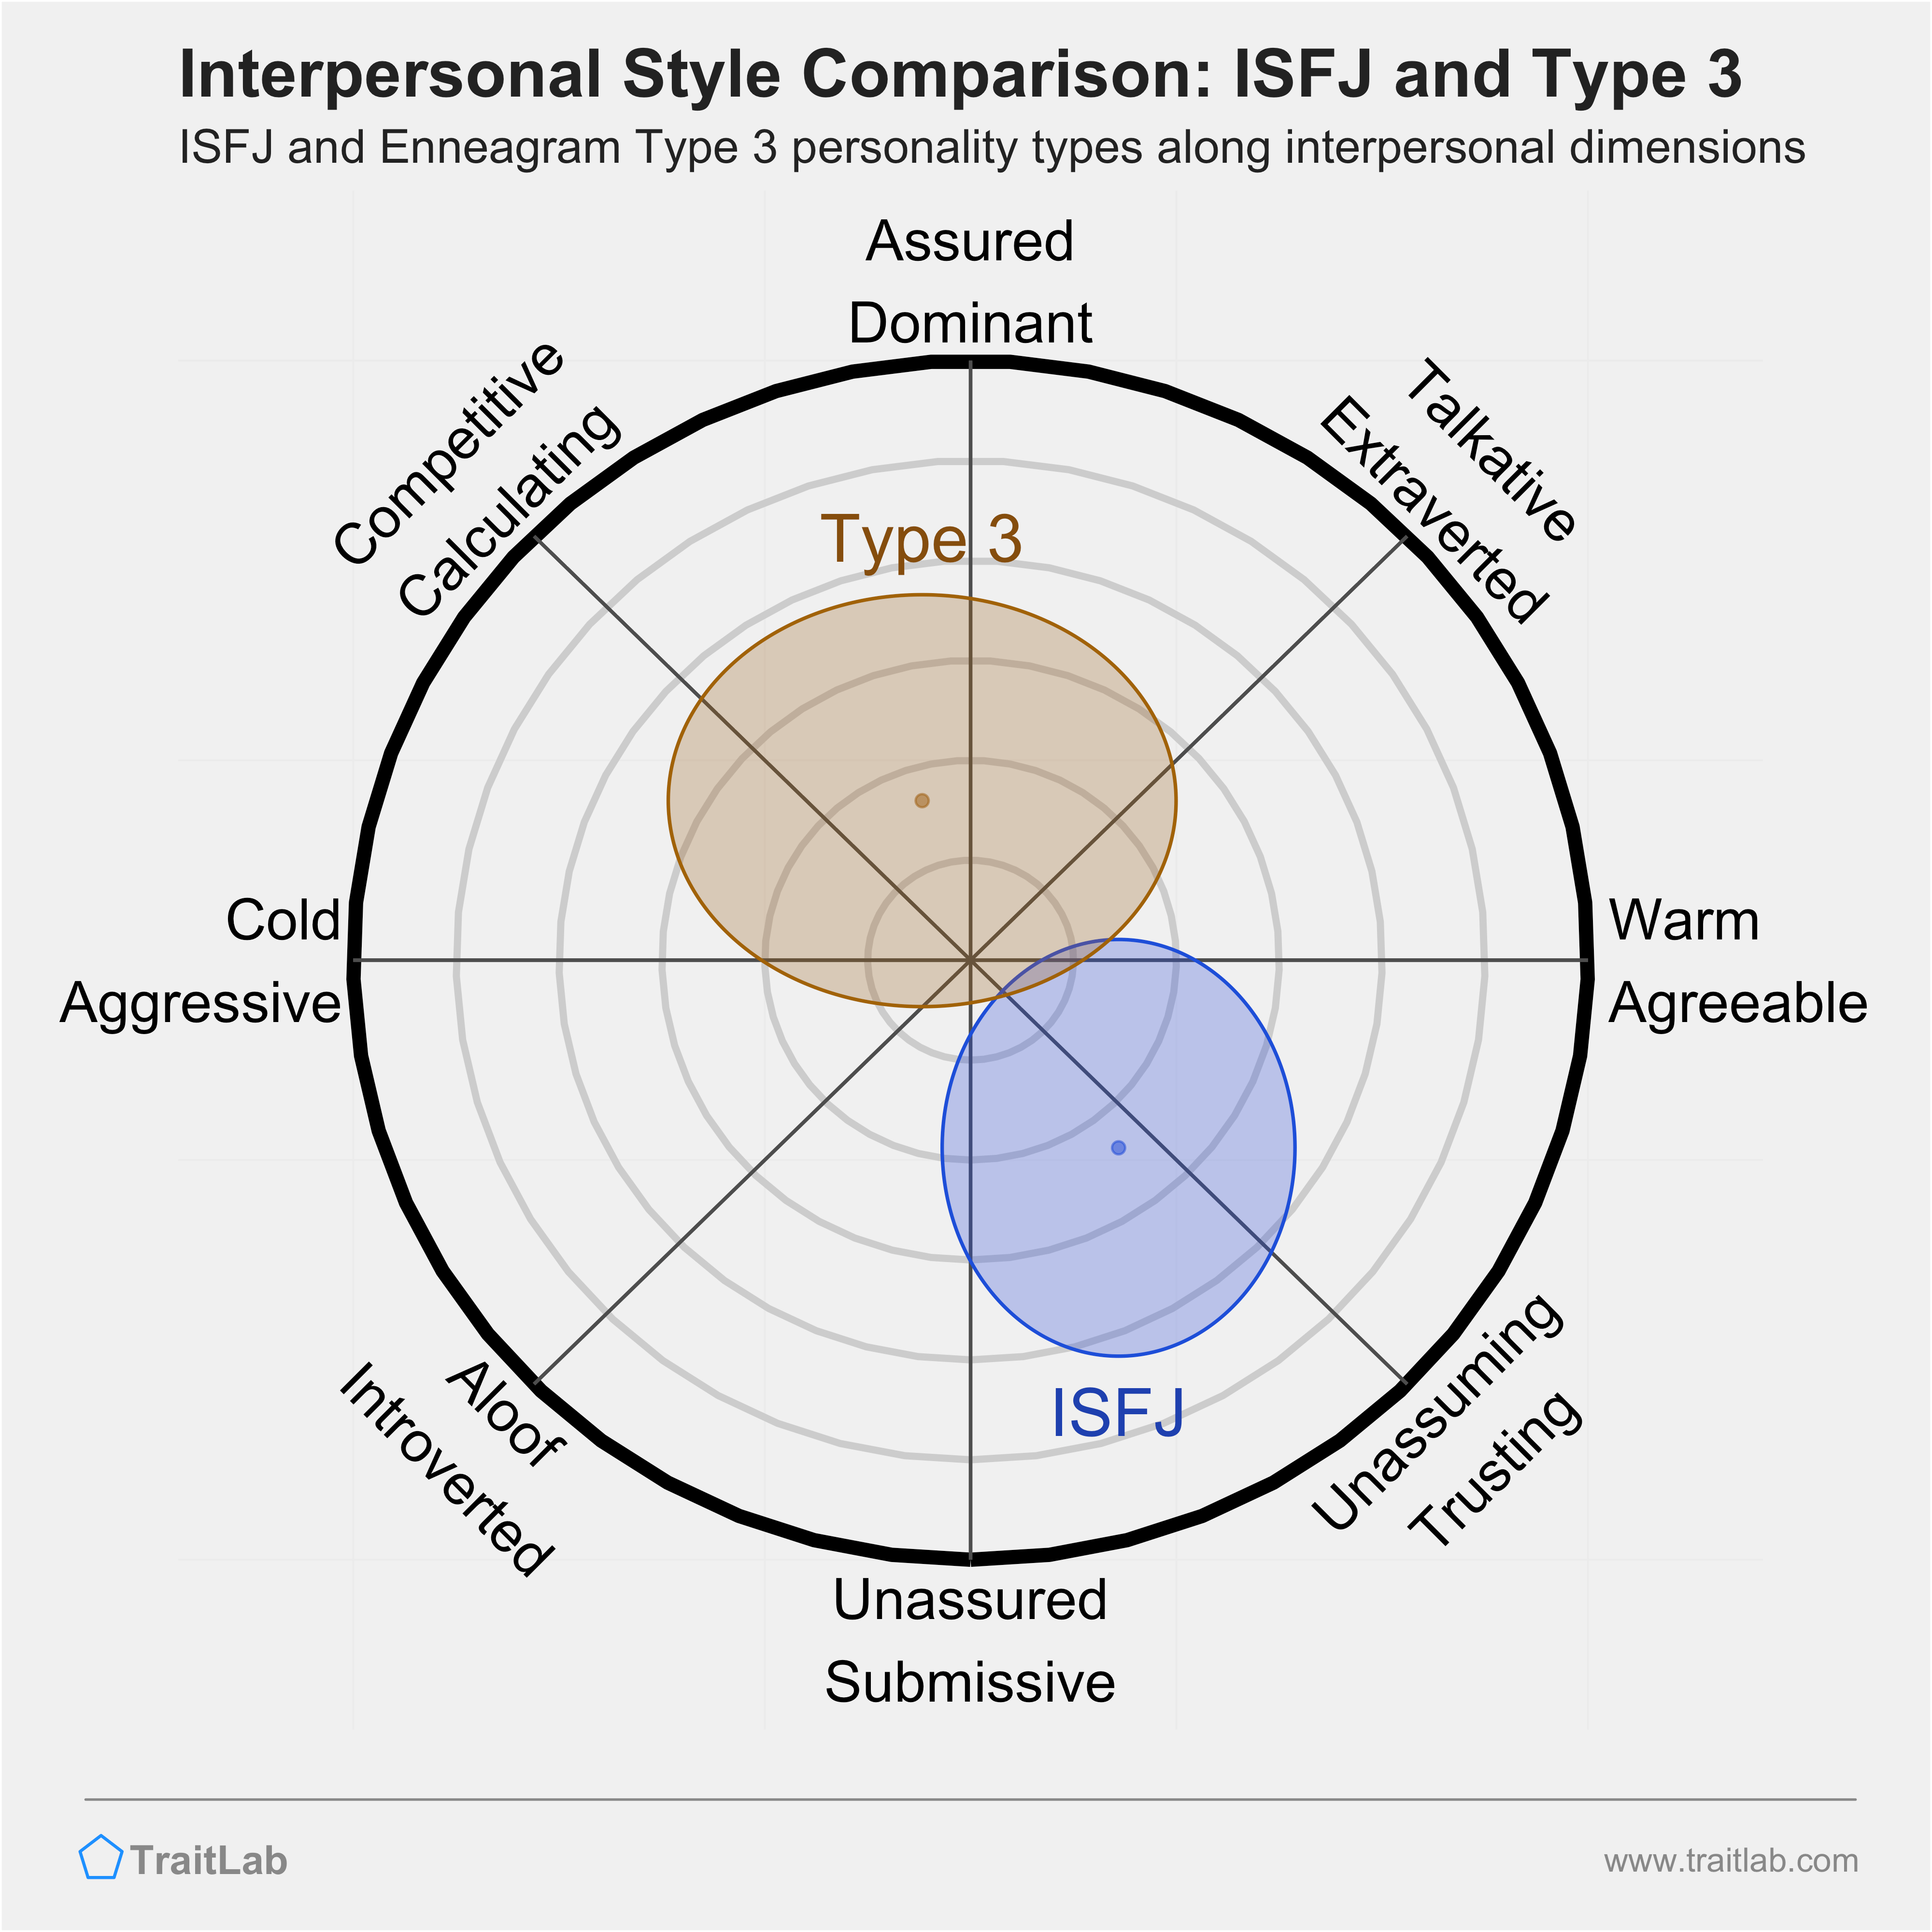 Enneagram ISFJ and Type 3 comparison across interpersonal dimensions